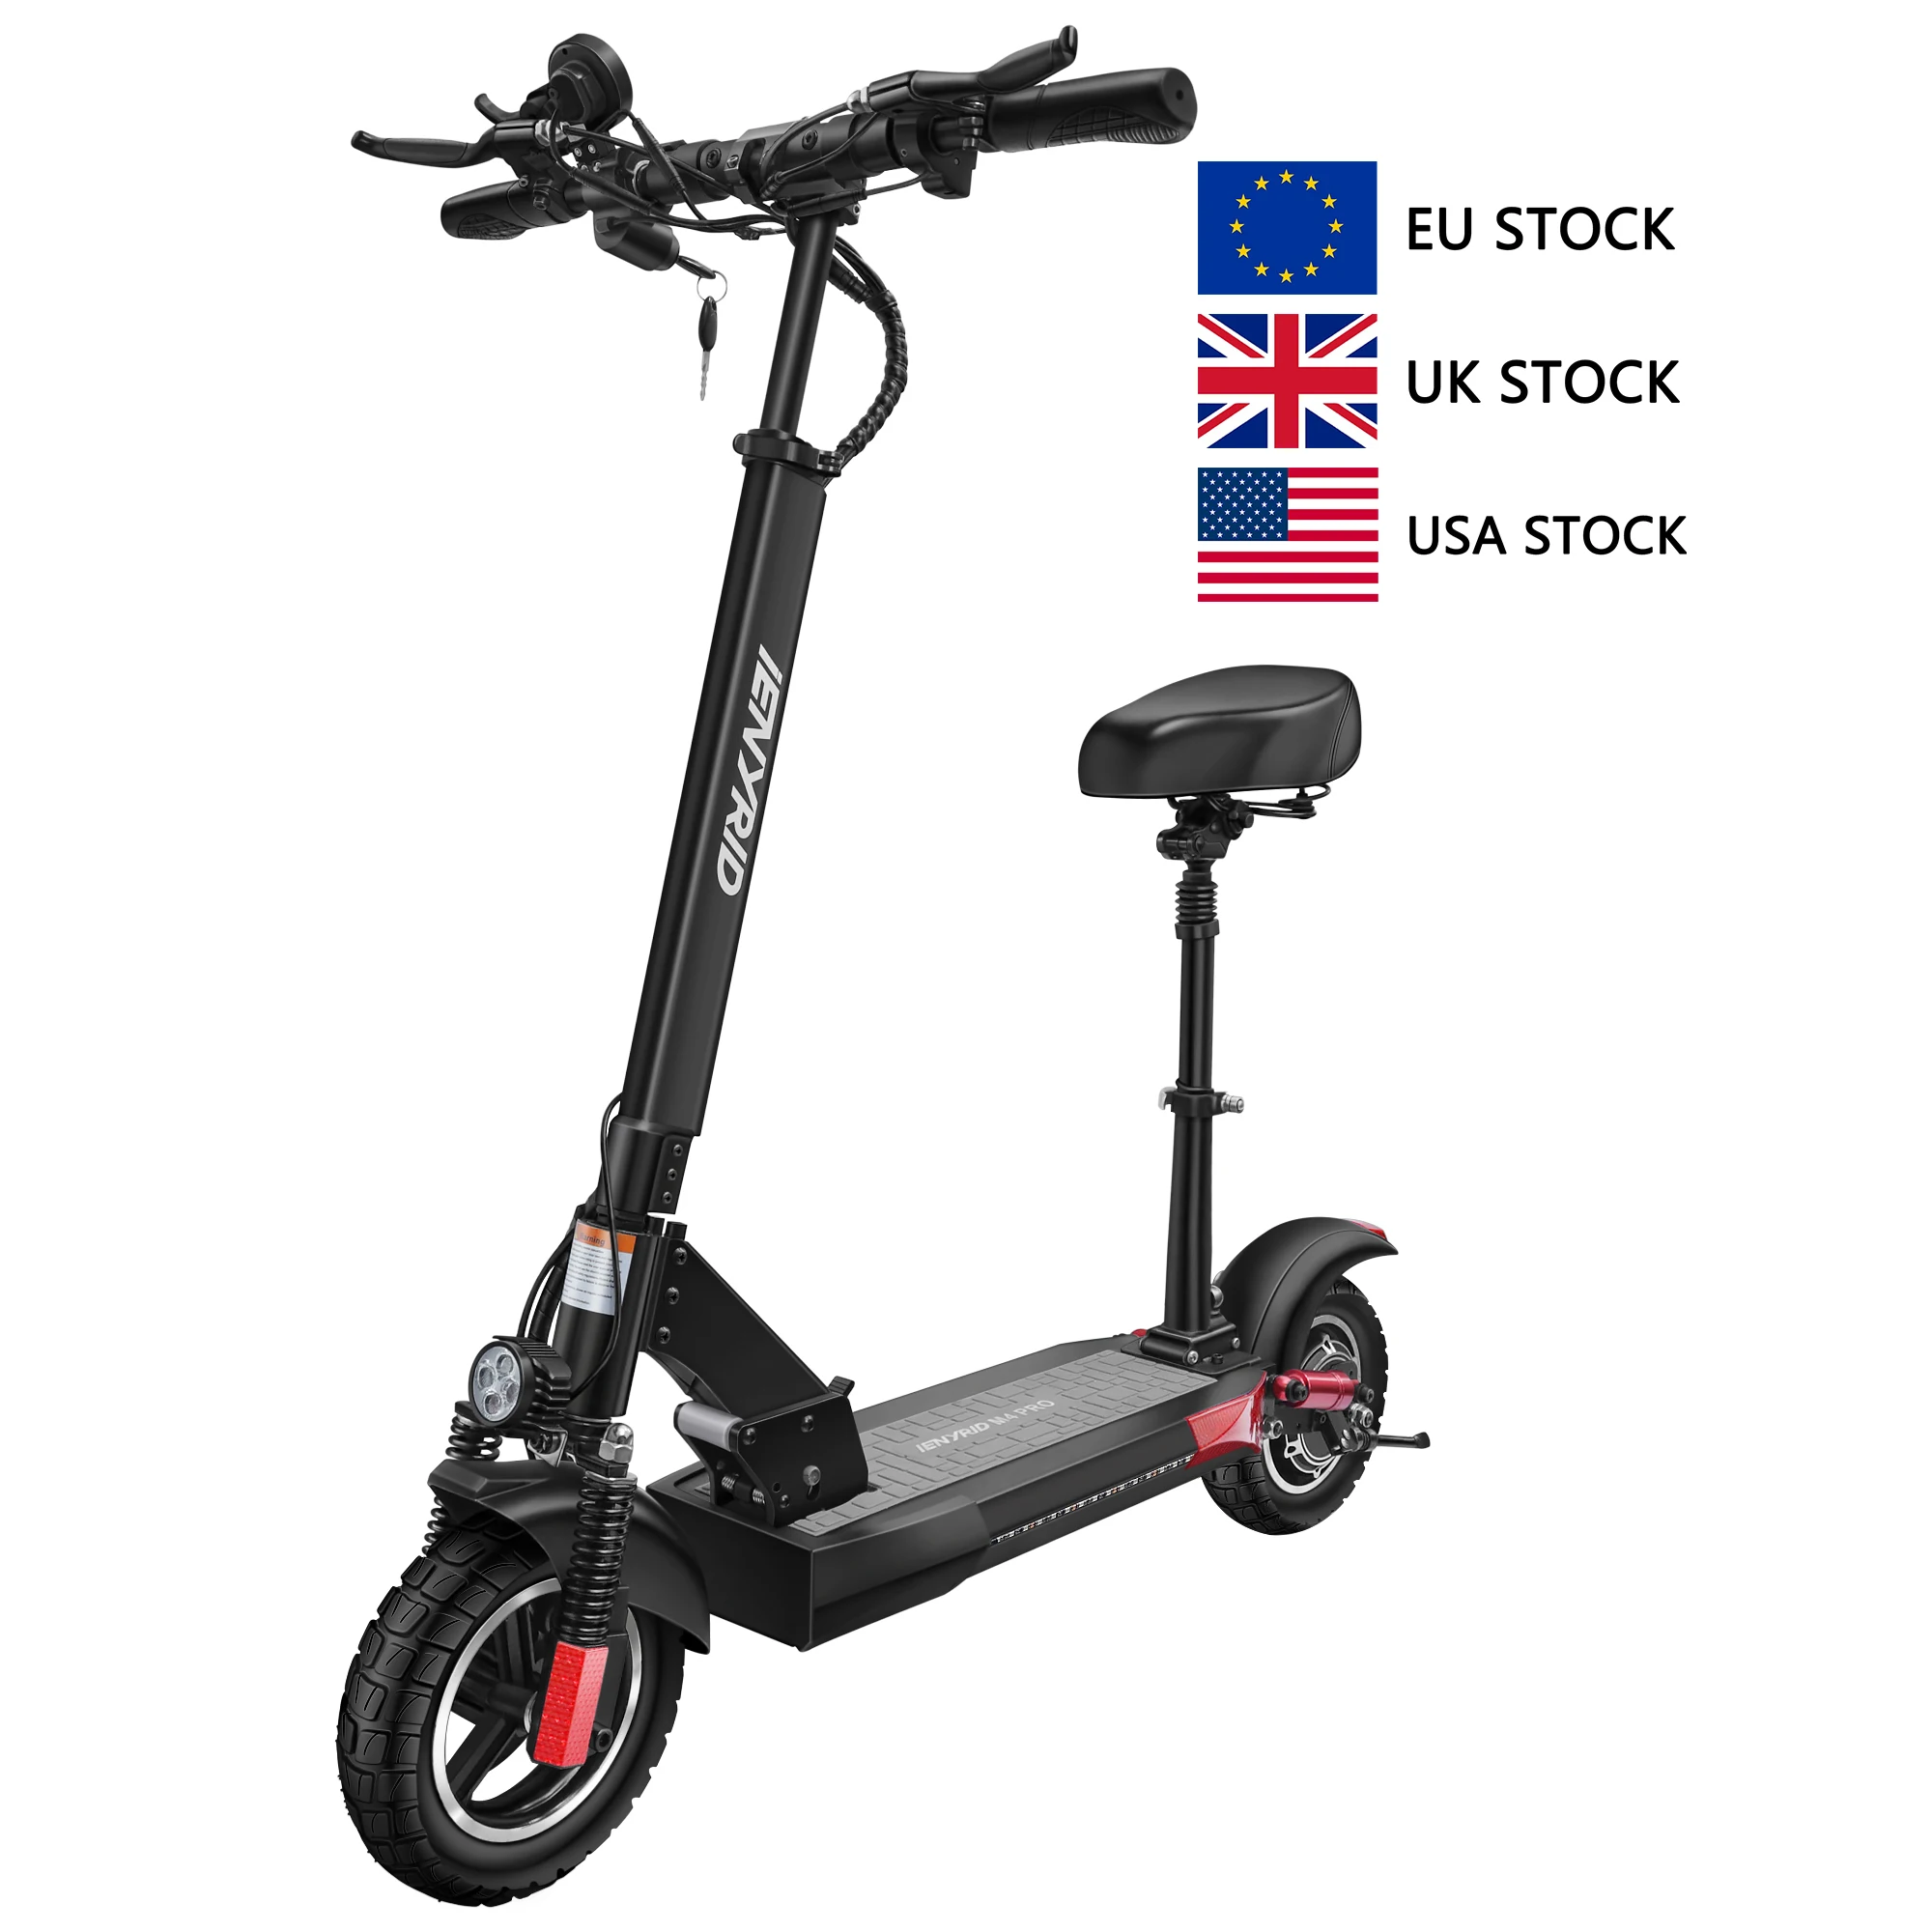 iENYRID M4 PRO 2021 upgraded 48V 500w 16ah battery Folding Electric Scooter 10" Off-road 45KM/H Max Speed EU warehouse